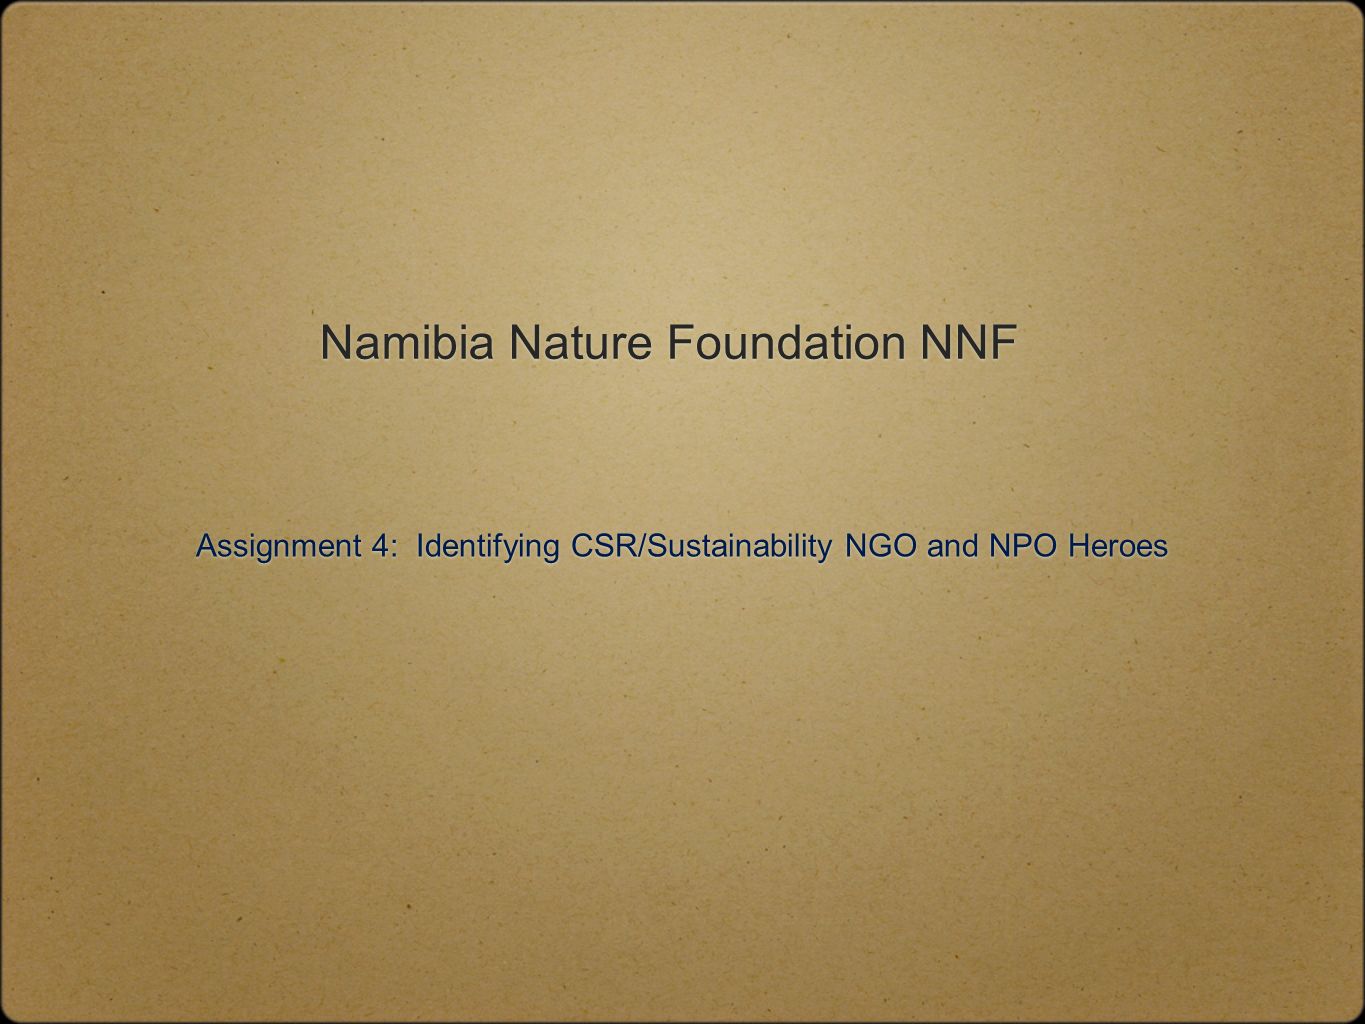 Namibia Nature Foundation Assignment 4: Identifying CSR/Sustainability NGO and NPO Heroes. - ppt download